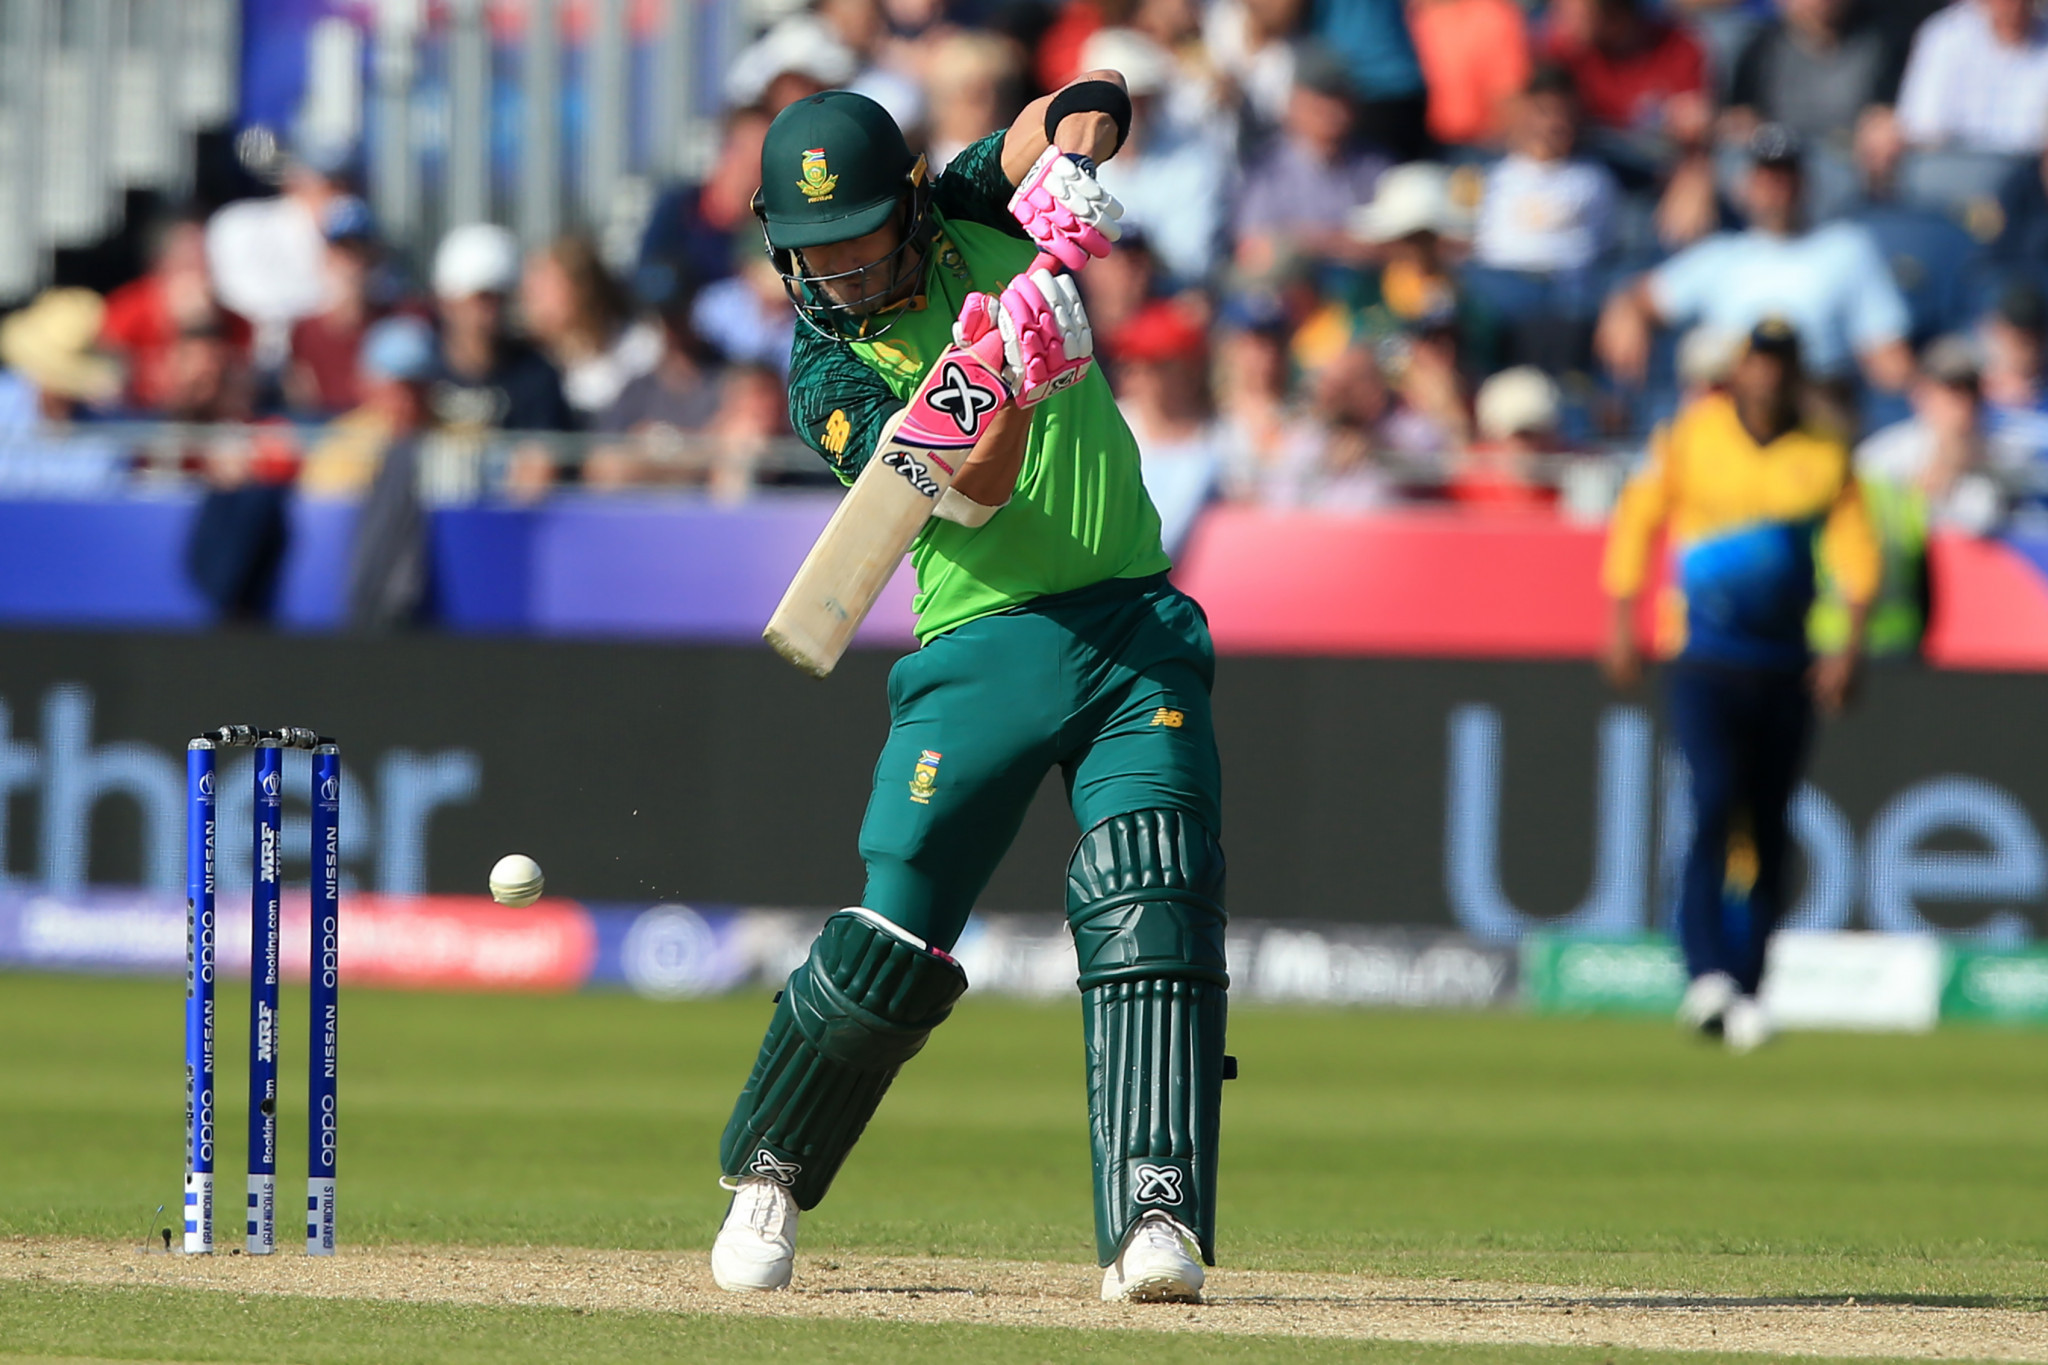 South Africa dent Sri Lankan semi-final hopes with nine-wicket win at Cricket World Cup